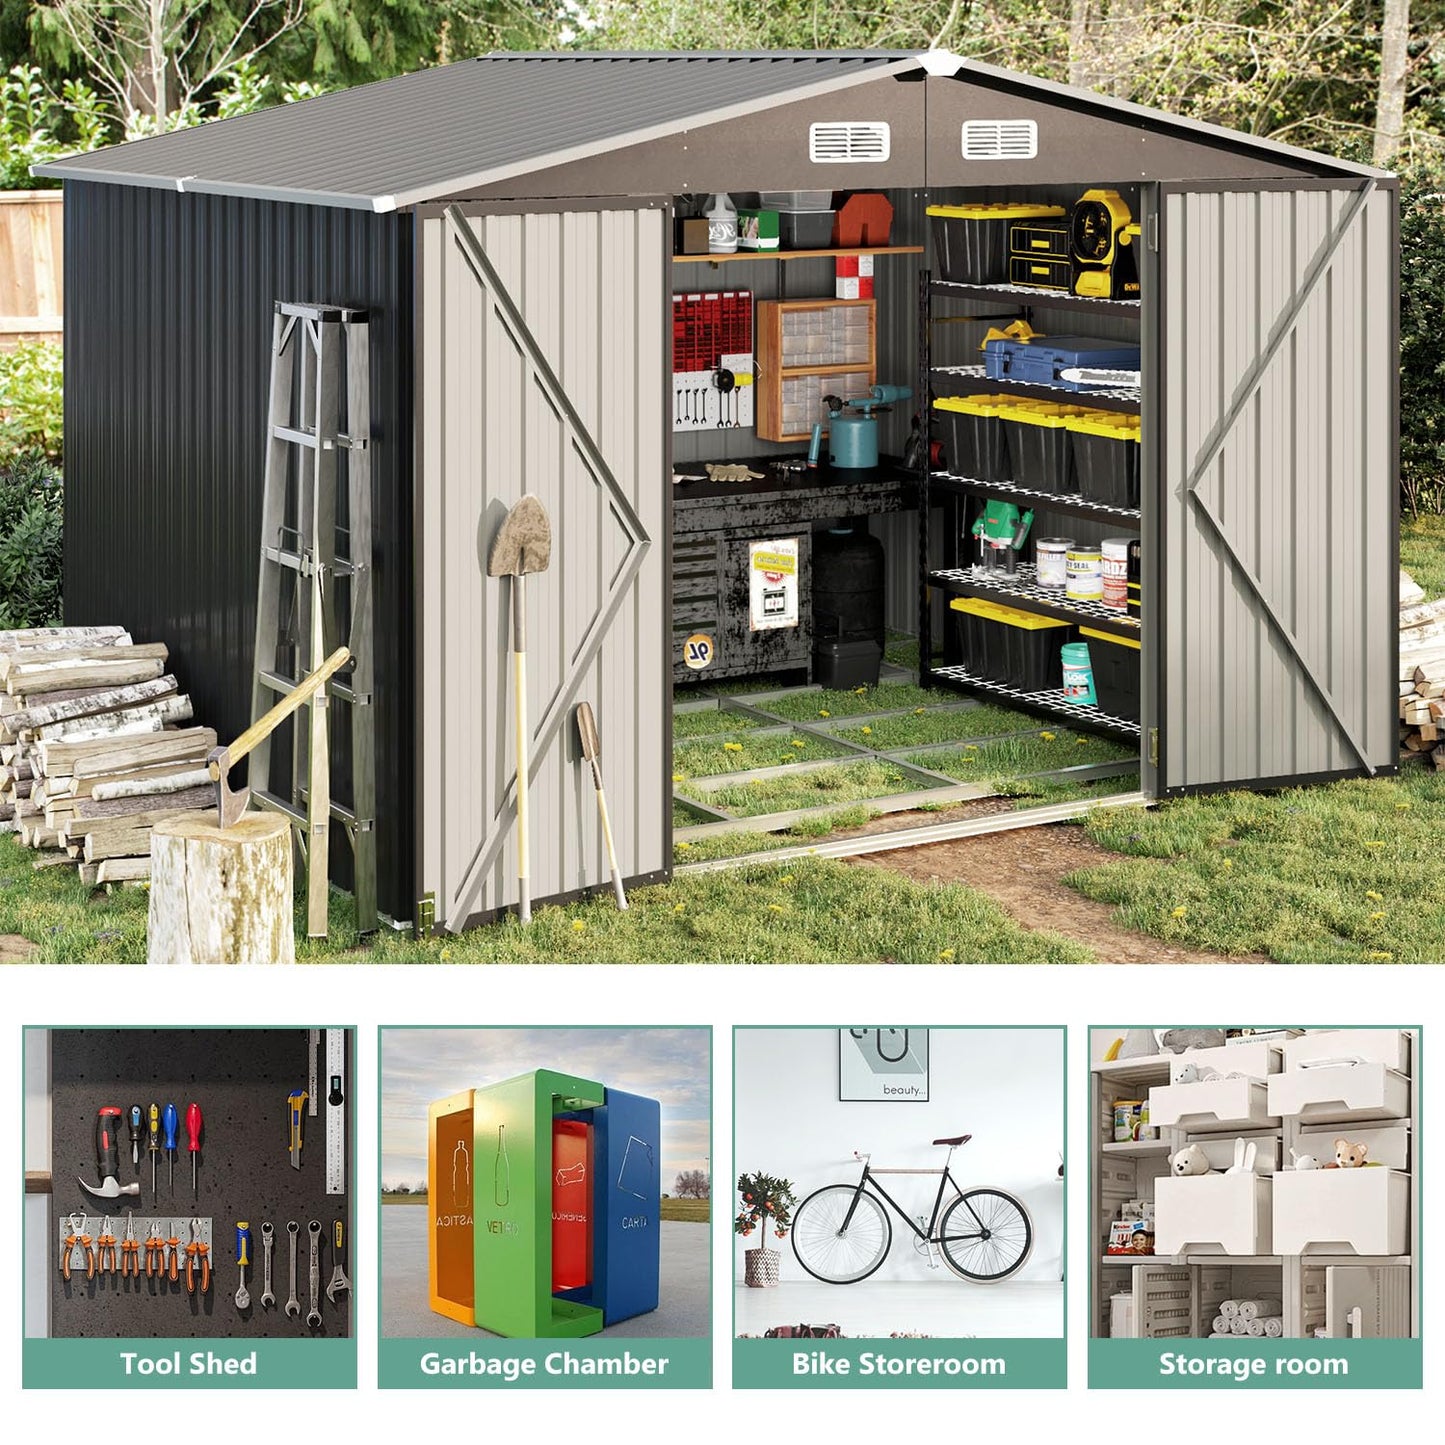 Aoxun 9.6’x7.8’ Outdoor Metal Storage Shed, Steel Utility Tool Shed Storage with Lockable Doors, Metal Sheds Outdoor Storage for Garden, Backyard, Lawn and Patio, Black